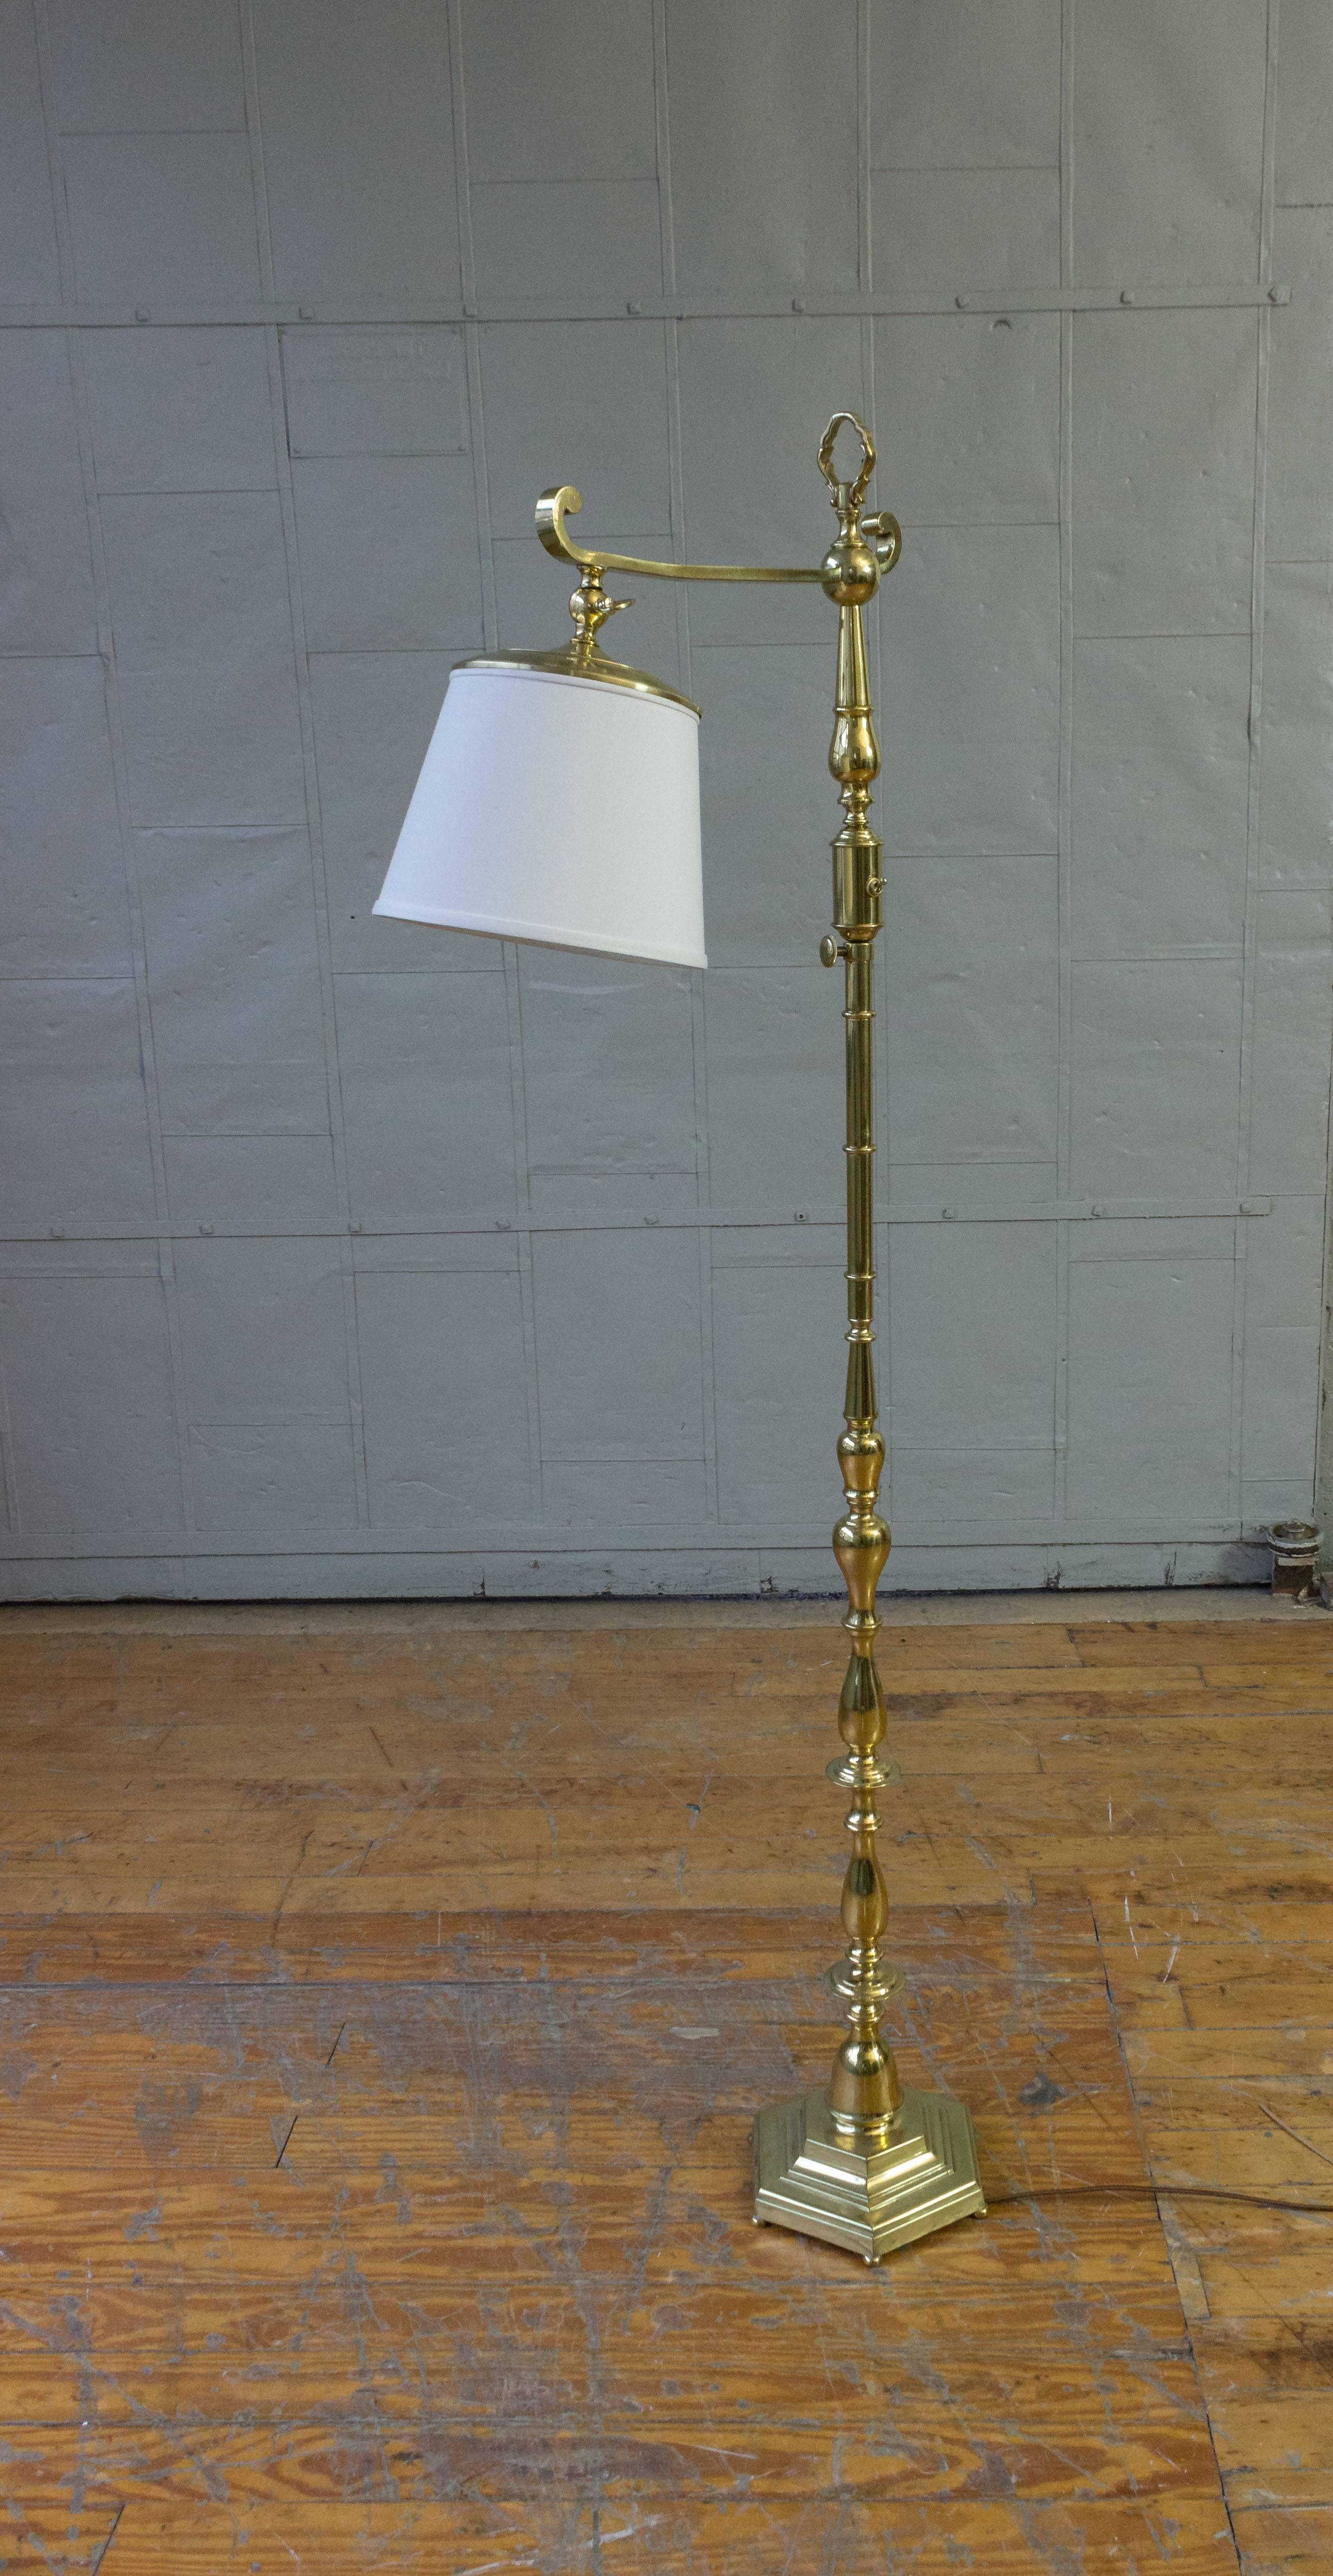 Reading lamp composed of turned and cast polished brass pieces, French, circa 1940s. The lamp has recently be rewired and is sold with a custom white linen-over paper shade. LED bulb or less than 40 watt incandescent bulbs are recommended to prevent